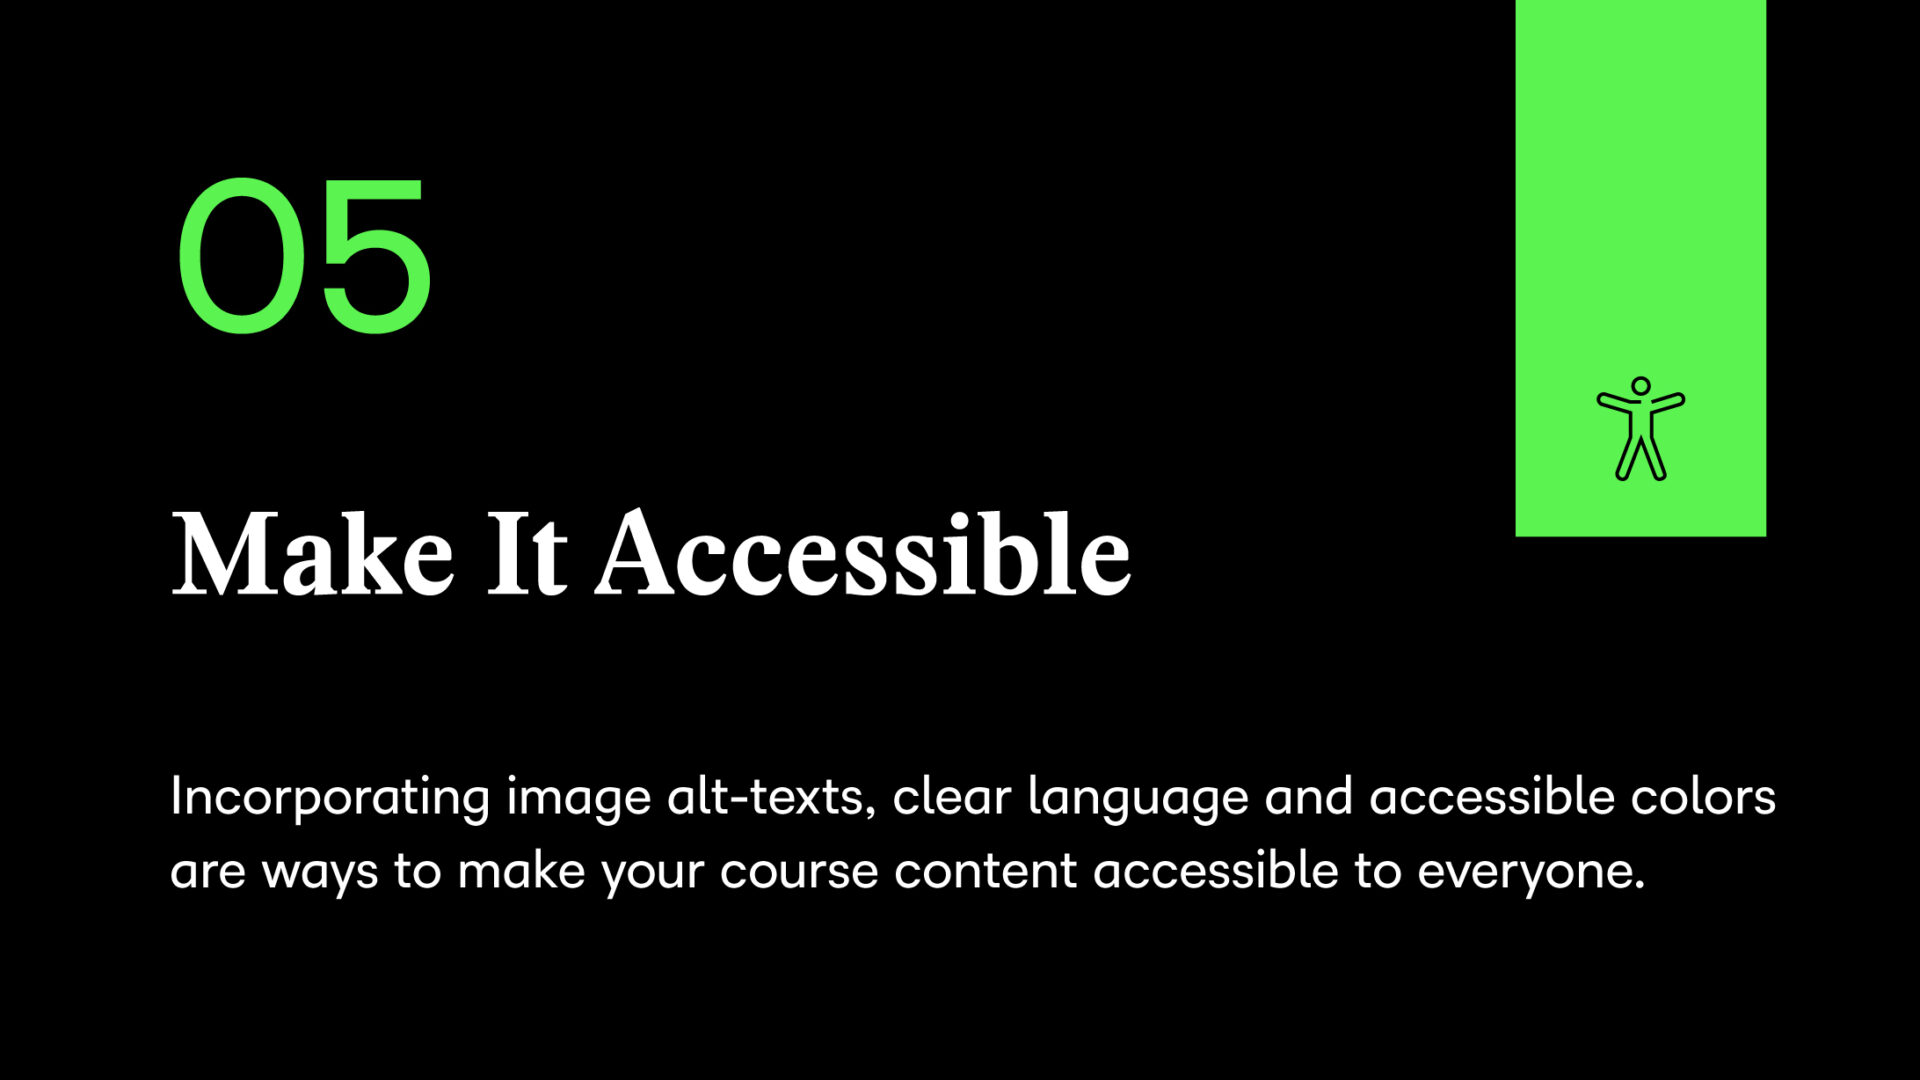 Make it accessible